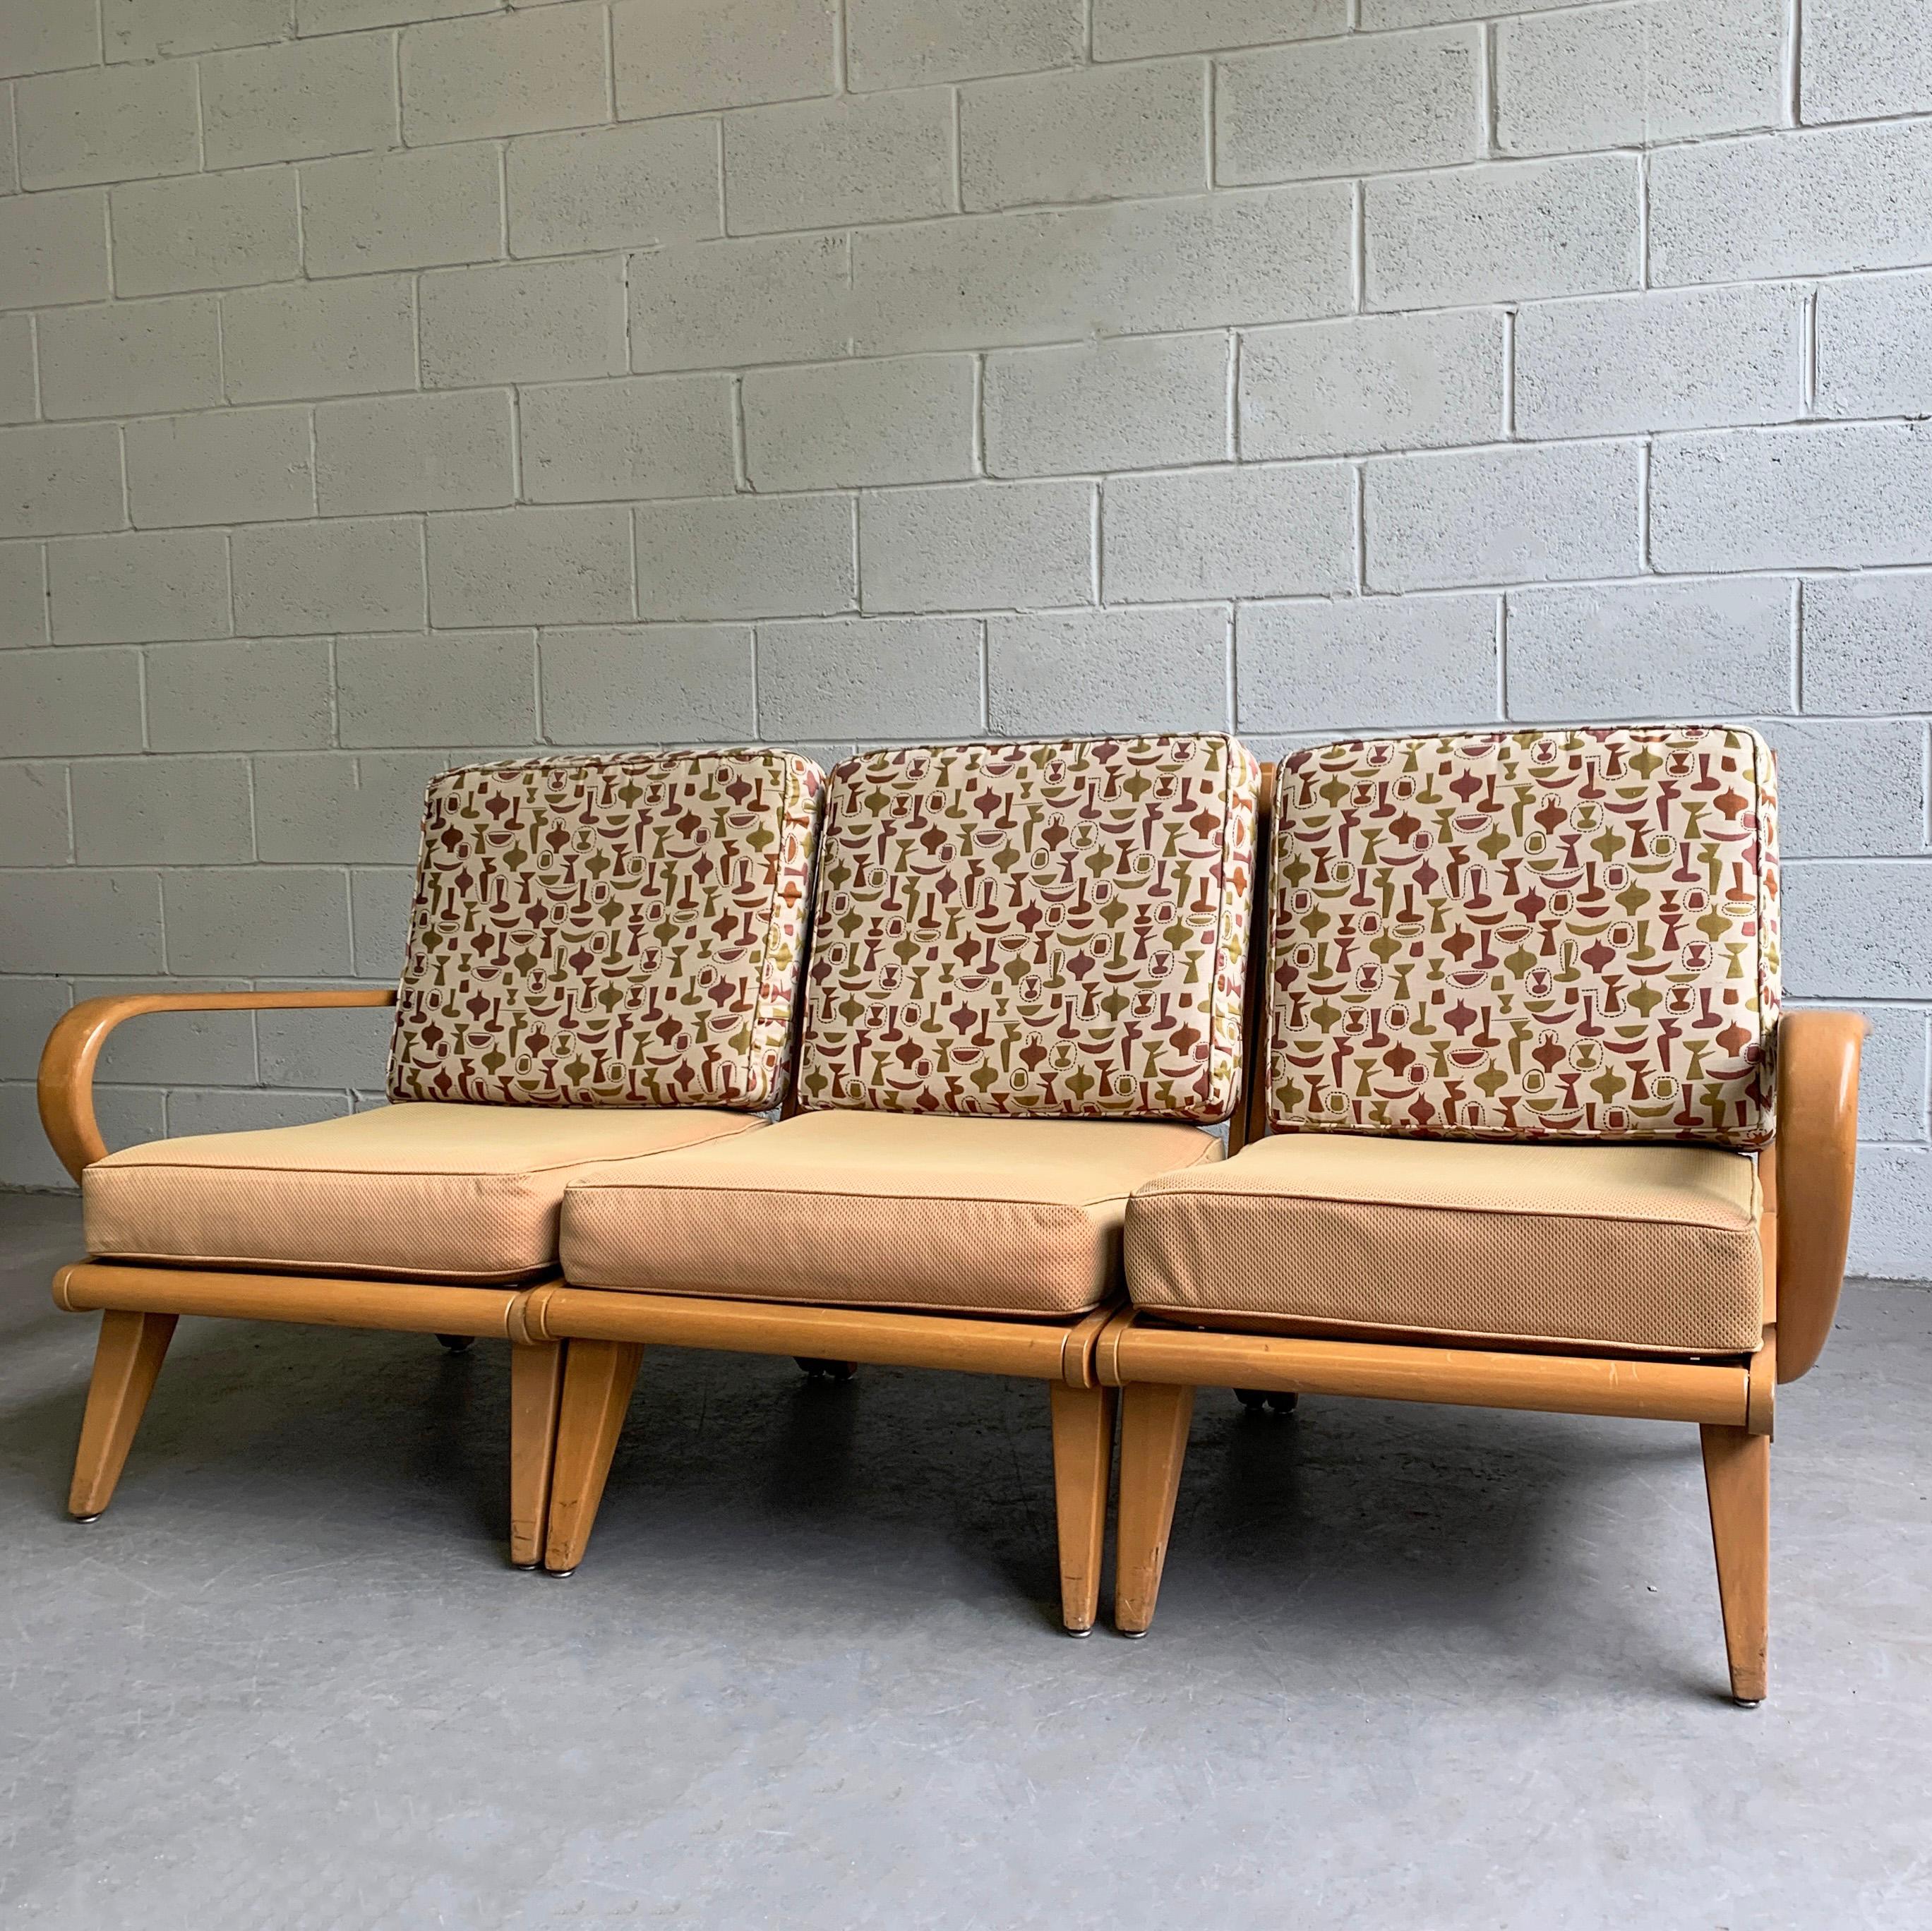 Mid-Century Modern, 3-piece, solid birch, sectional sofa by Heywood-Wakefield Co. with bentwood arms can be used separately or as a loveseat with slipper chair combination.